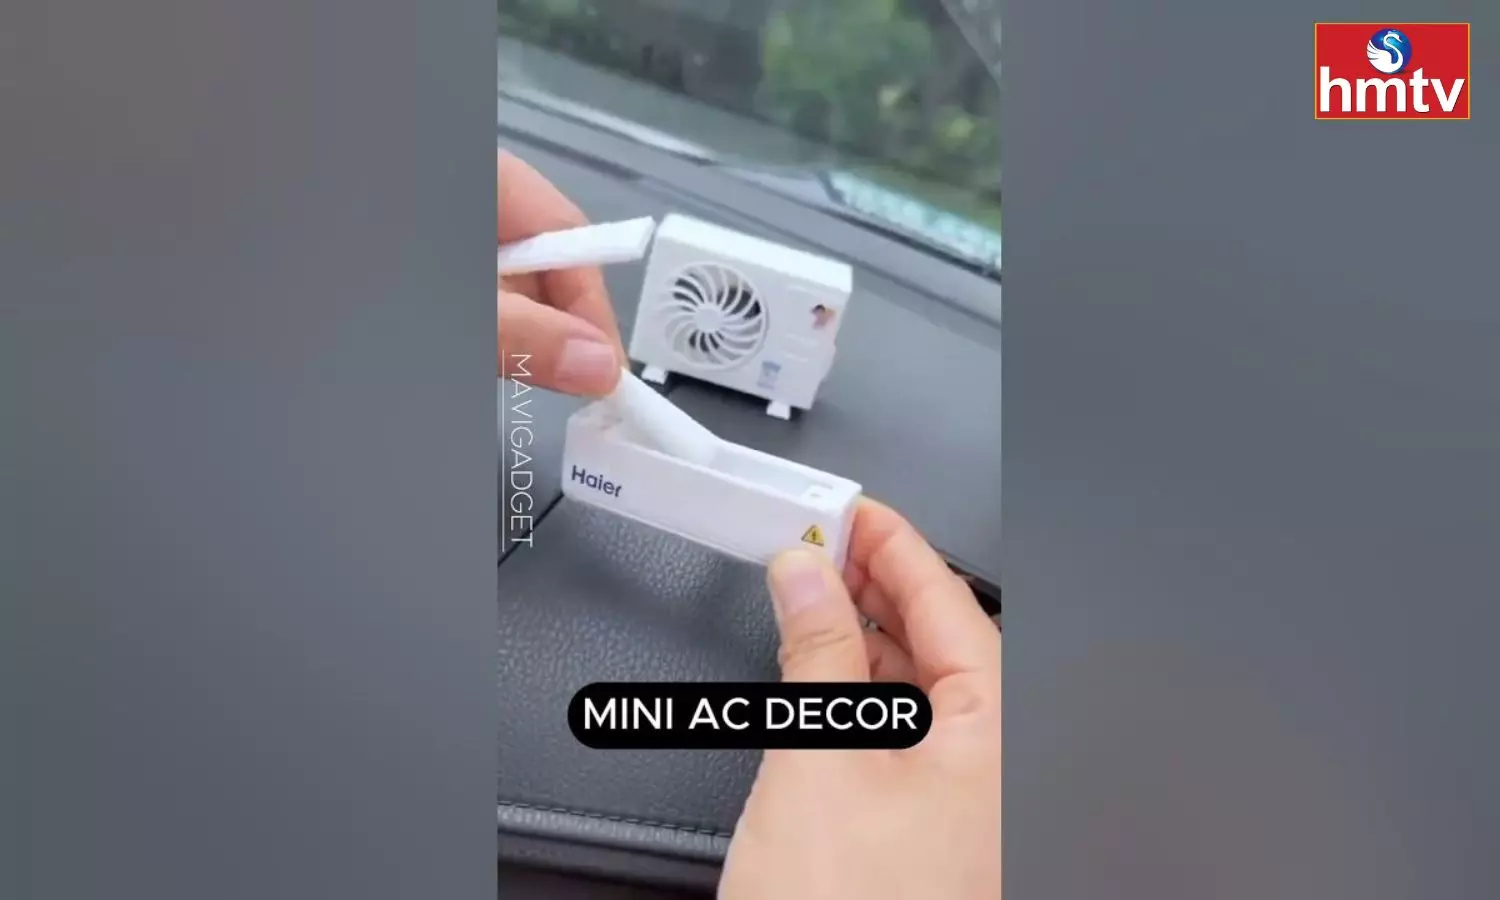 Mini solar AC for car check eco-friendly device price and features auto news in Telugu